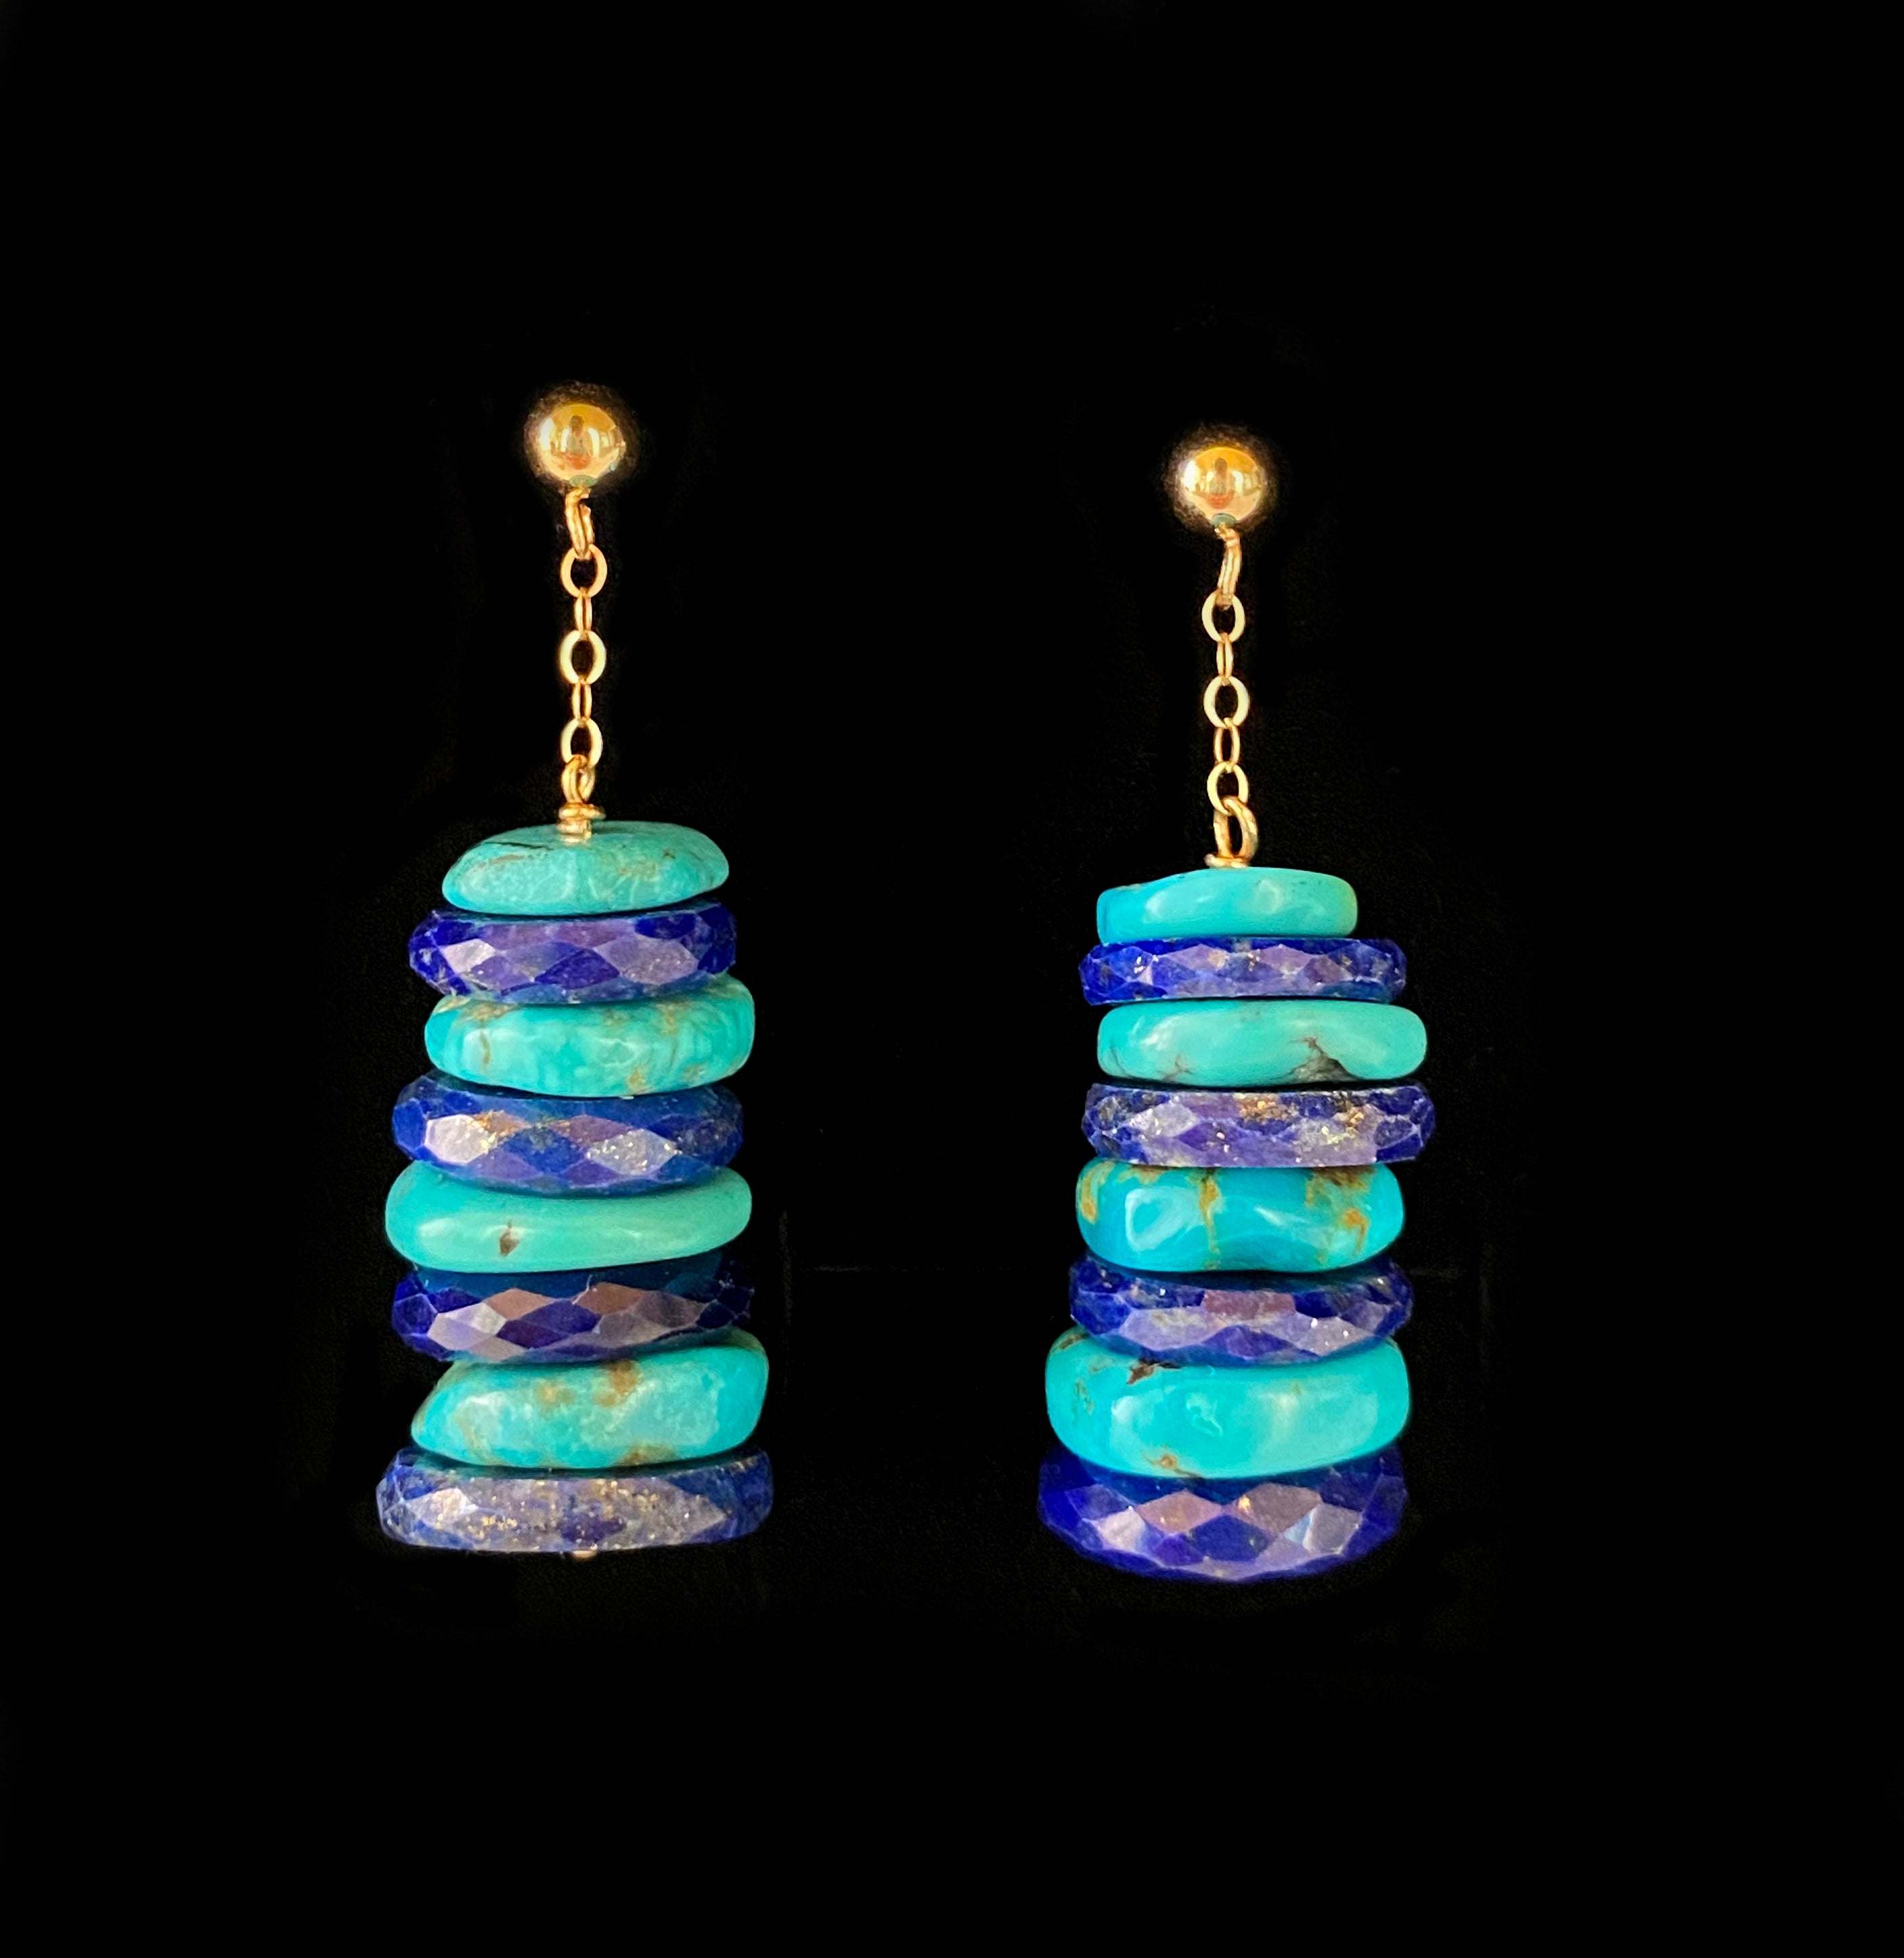 Vibrant pair by Marina J. These vividly colored Earrings are made using all natural and faceted Turquoise and Lapis Lazuli flat beads, displaying radiant hues of Blue! Measuring a of 1.75 inches long total, this pair of Studded Earrings features a